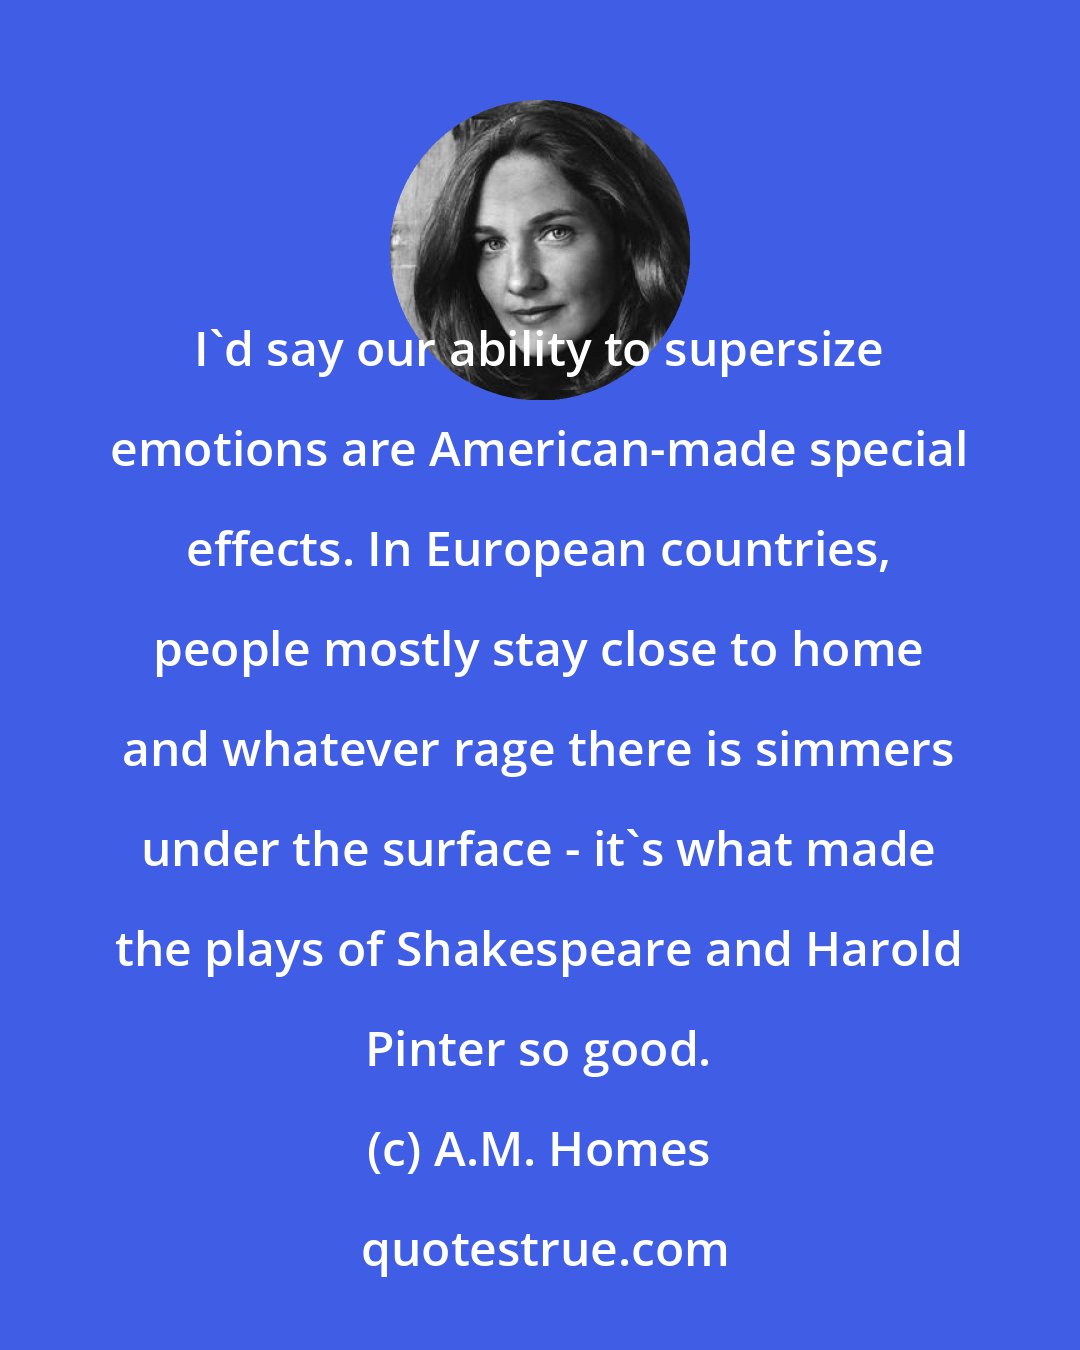 A.M. Homes: I'd say our ability to supersize emotions are American-made special effects. In European countries, people mostly stay close to home and whatever rage there is simmers under the surface - it's what made the plays of Shakespeare and Harold Pinter so good.